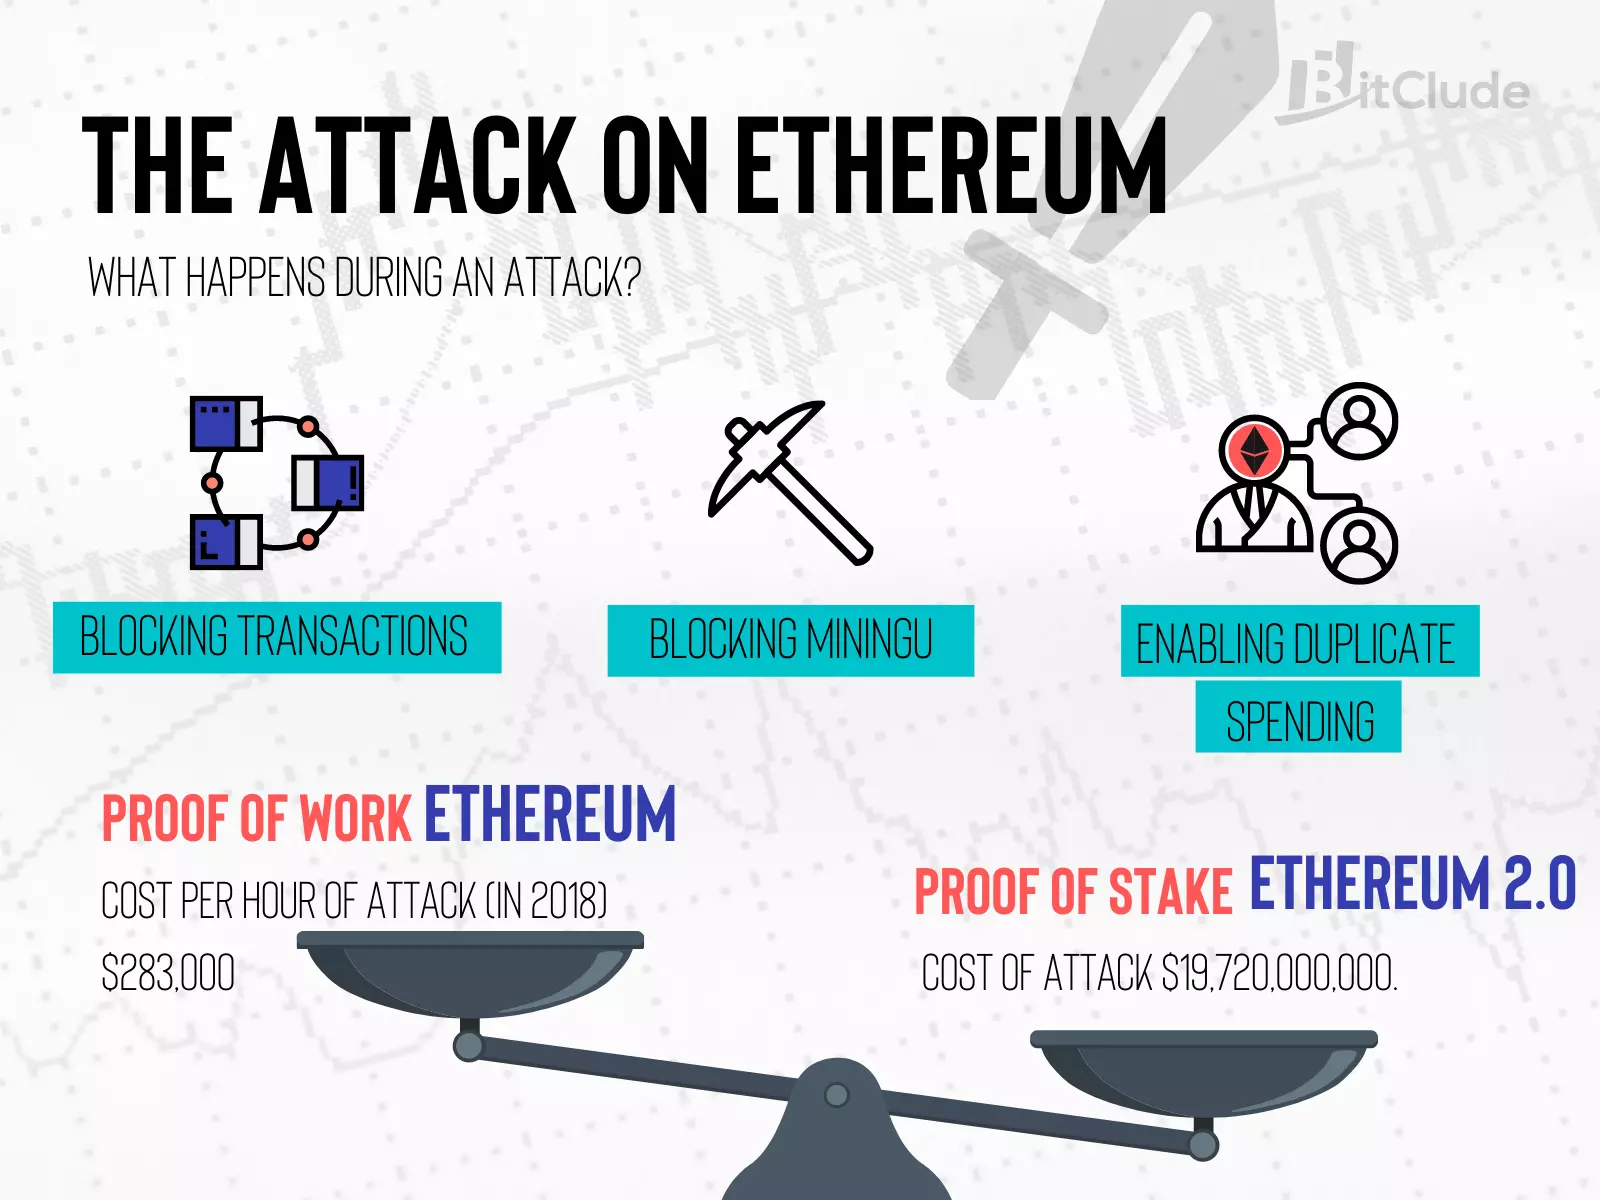 Attack on Ethereum - what is happening during the attack on ethereum?